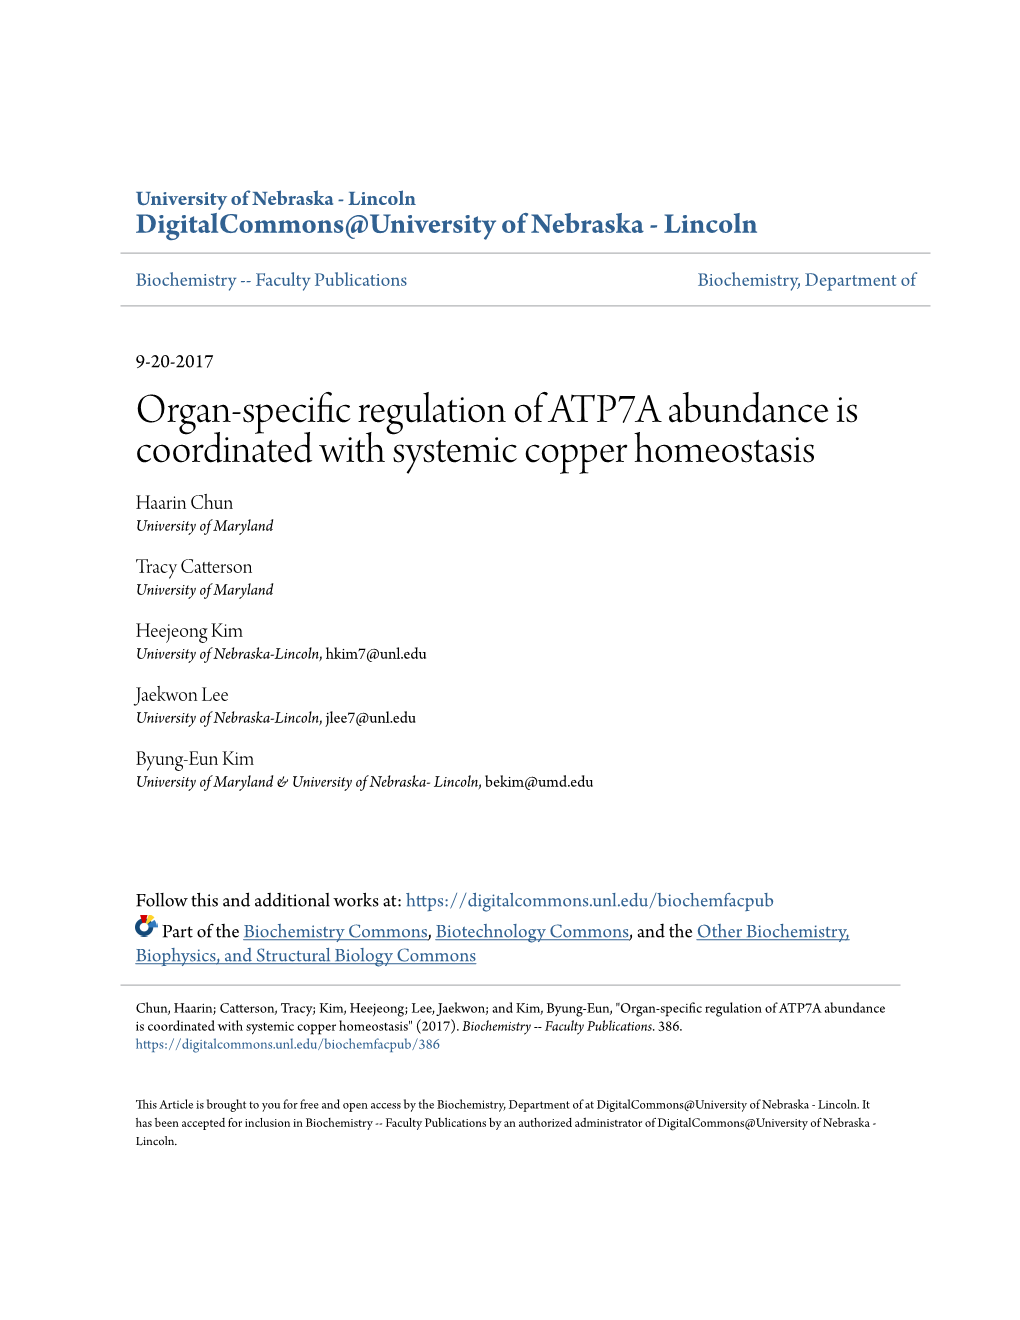 Organ-Specific Regulation of ATP7A Abundance Is Coordinated With